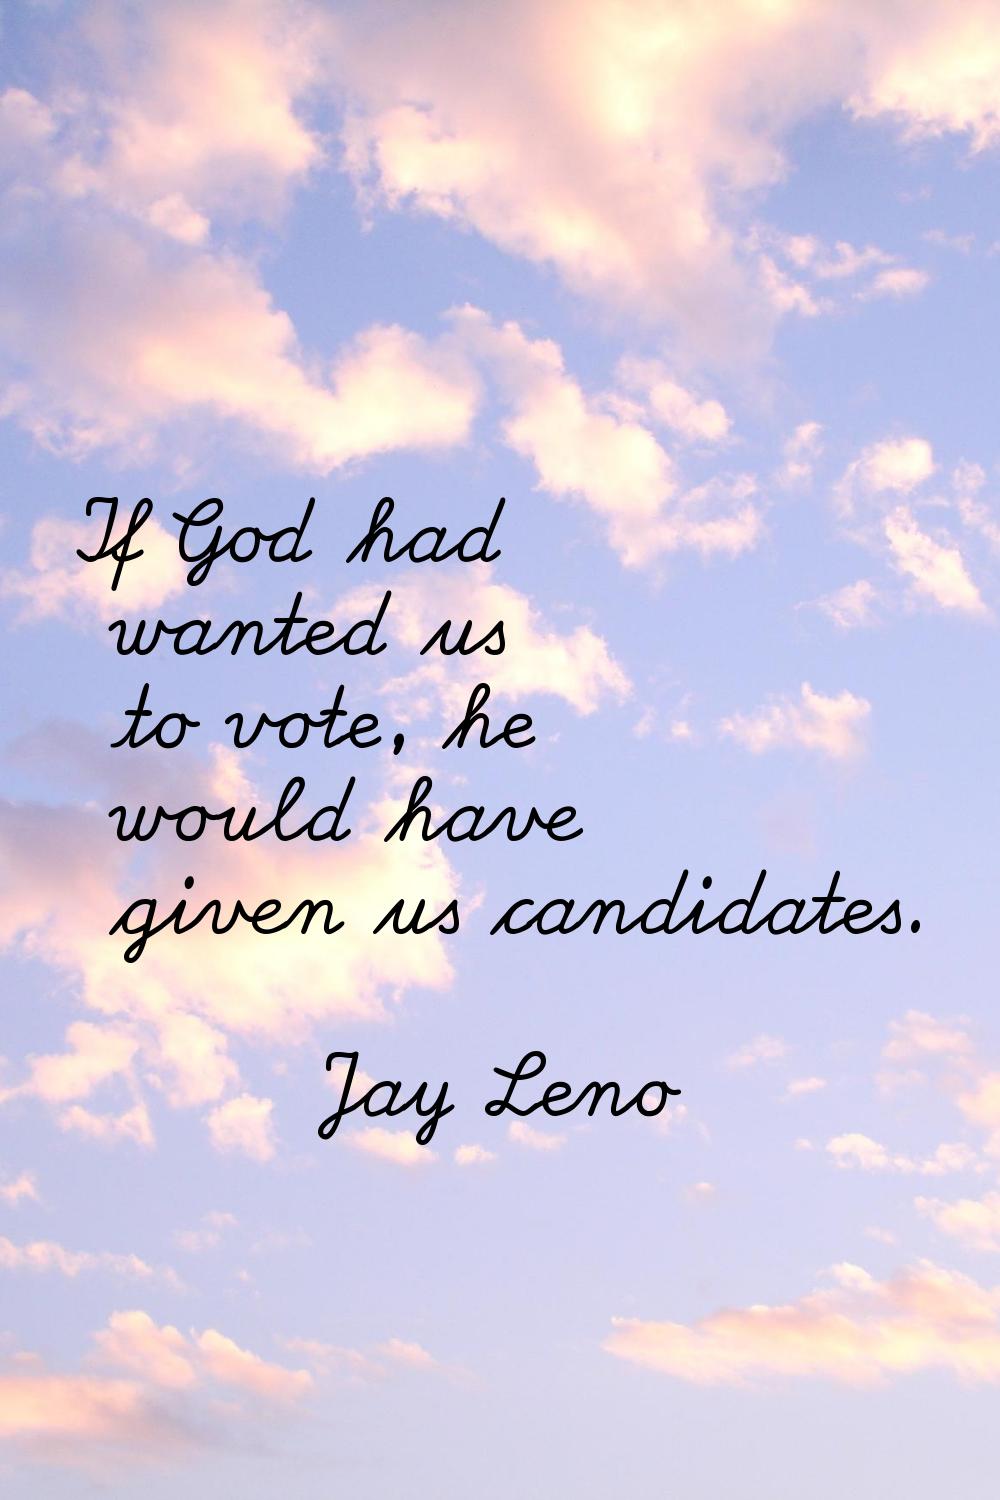 If God had wanted us to vote, he would have given us candidates.